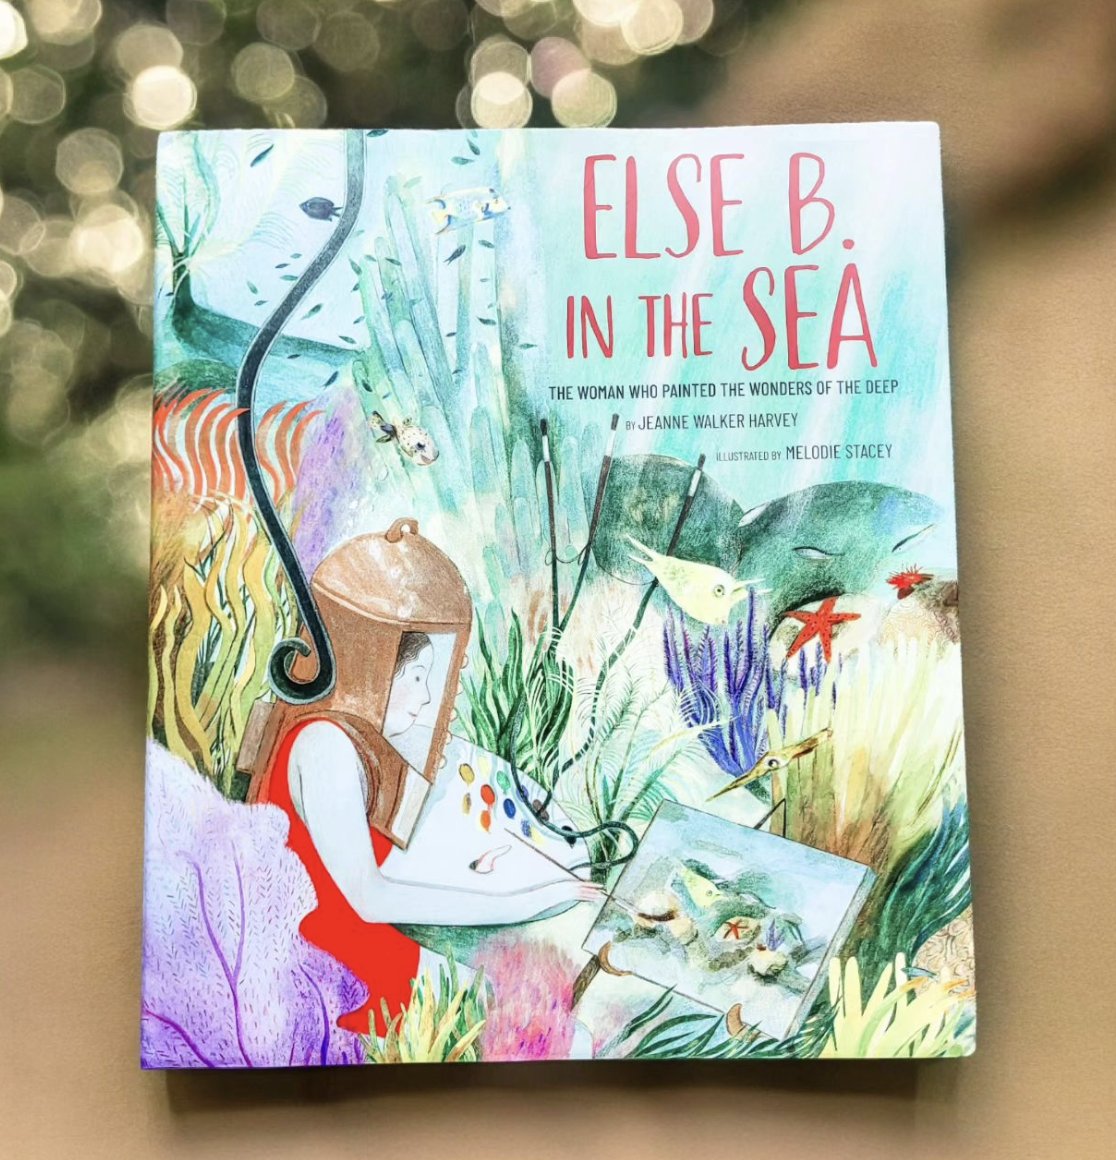 'What a lovely book in both words and illustrations! This book captures the story of Else B, who dives into the sea and draws/paints all the wonderful and fascinating images of sea life. I'm absolutely blown away that this is a true story!!' -INSTA@ pagesforpaige❤️🌊❤️